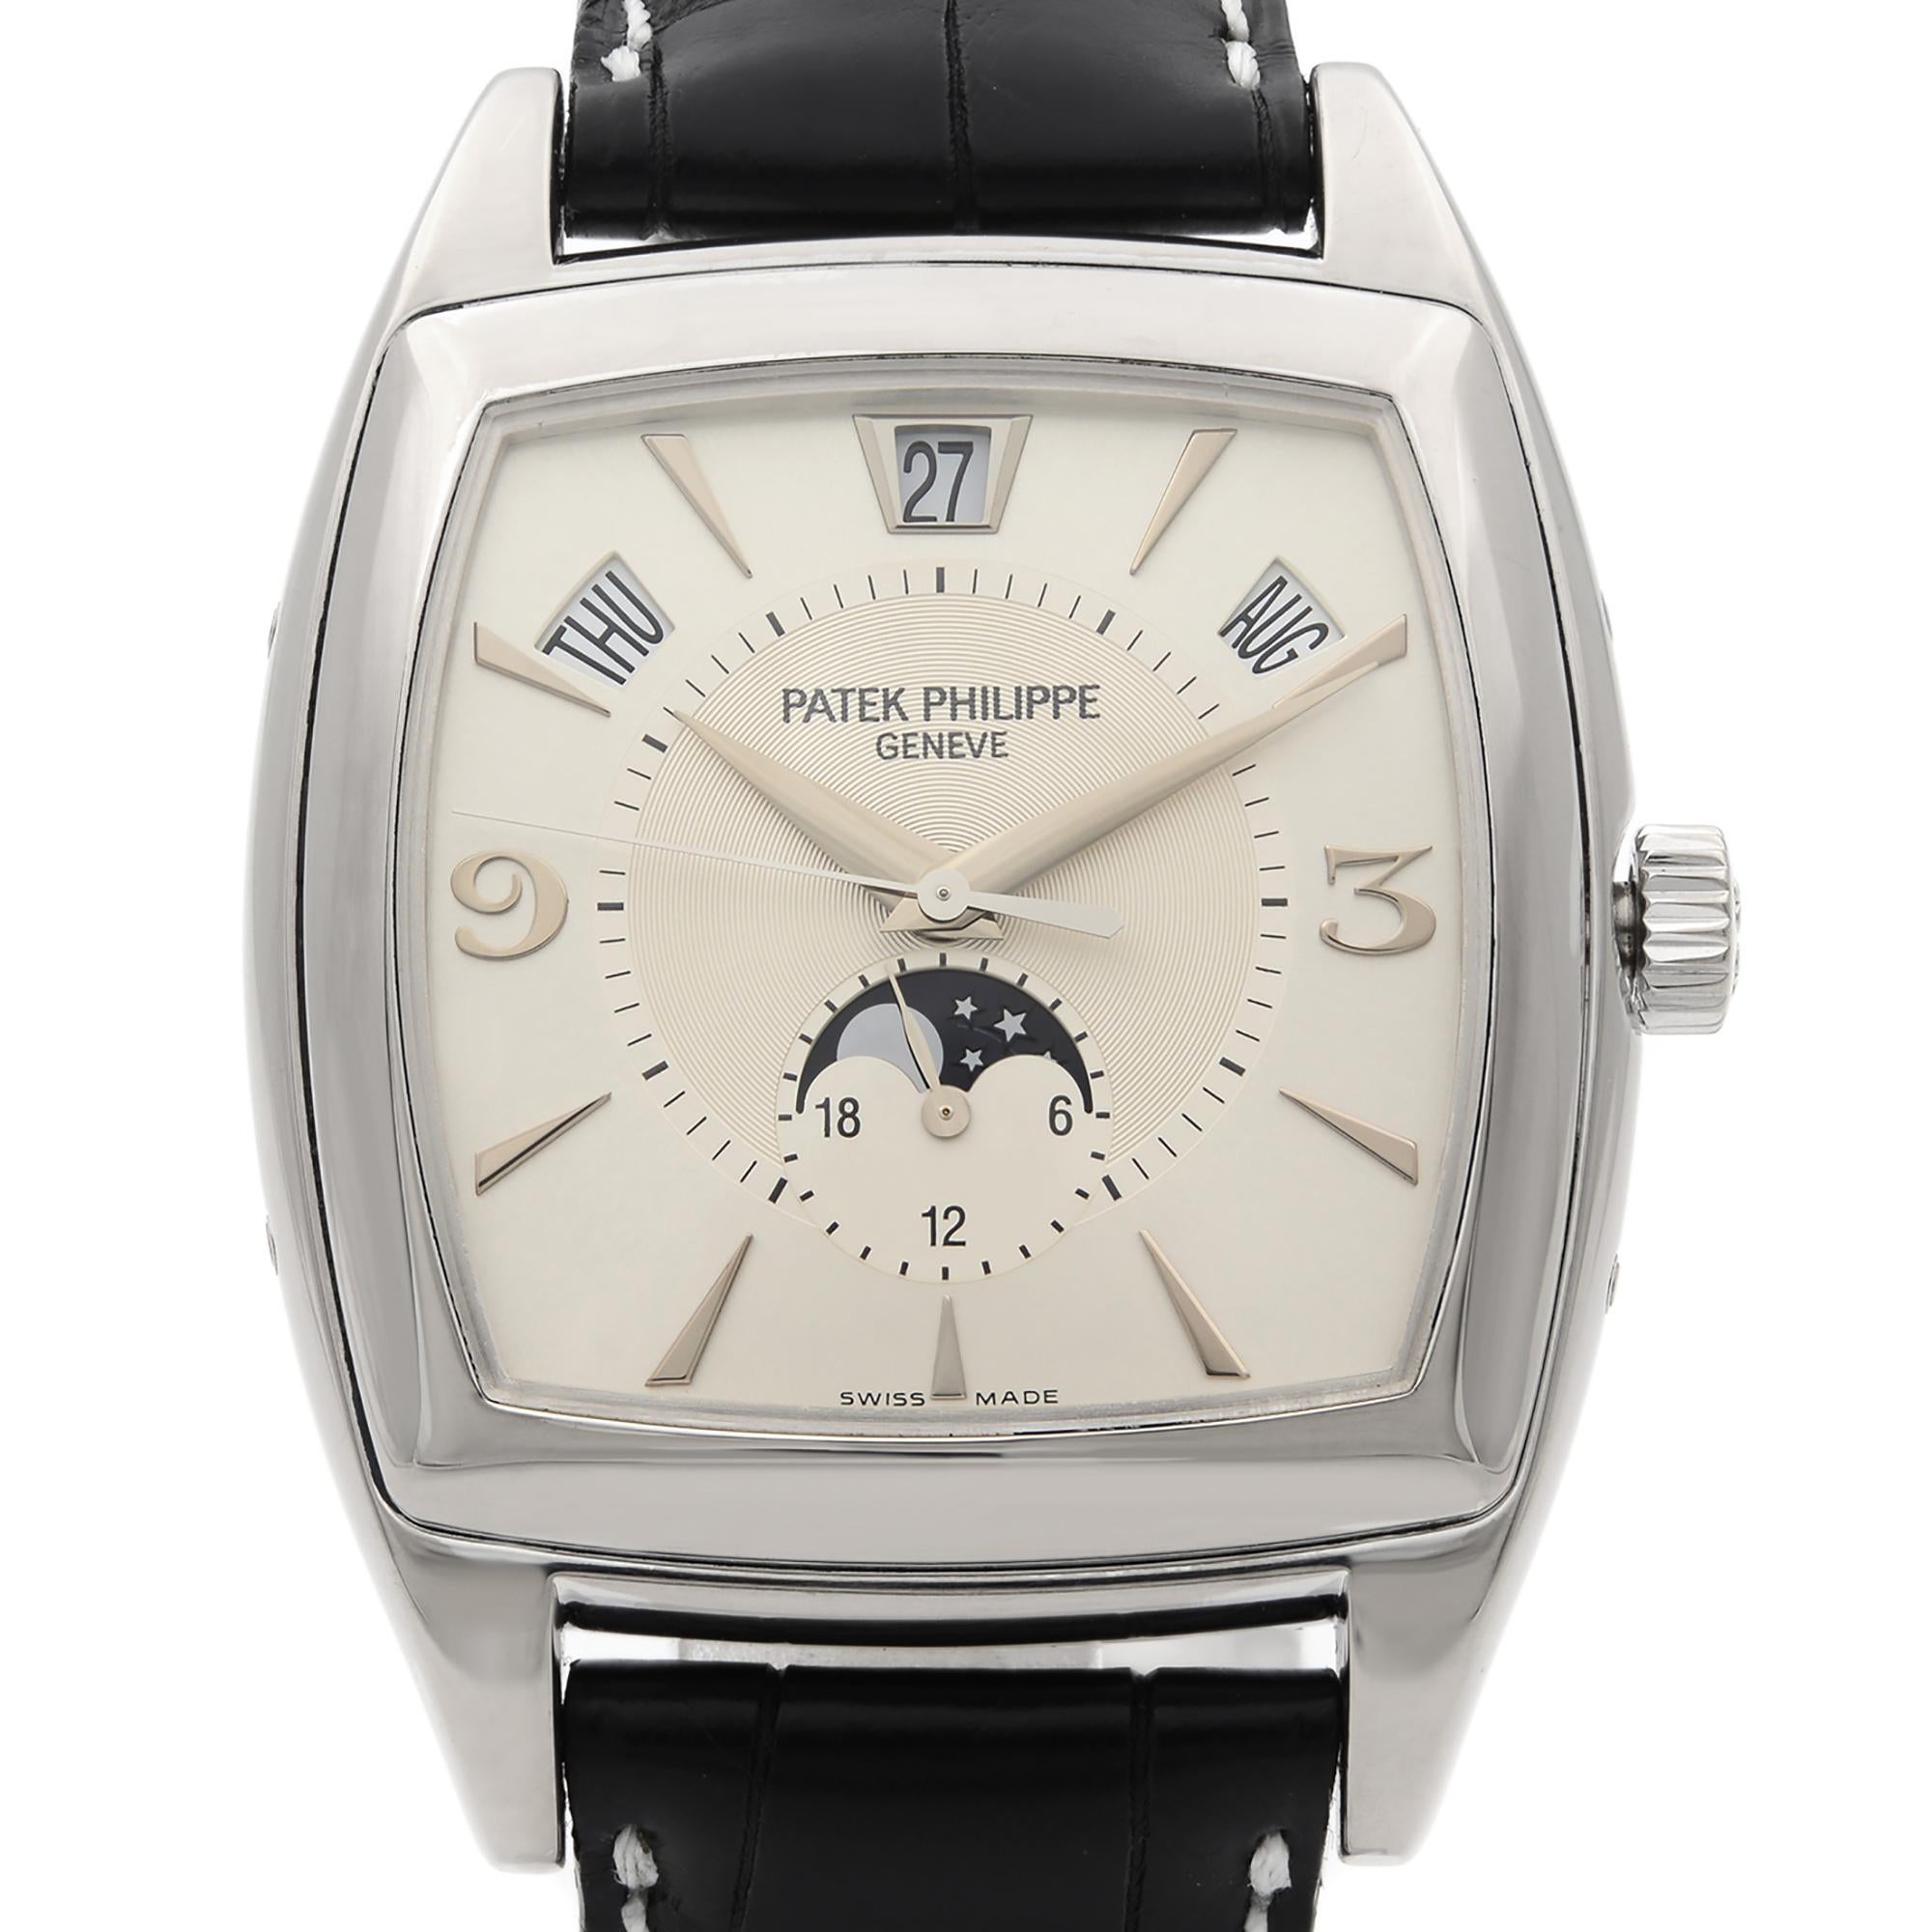 This pre-owned Patek Philippe Gondolo 5135 is a beautiful men's timepiece that is powered by mechanical (automatic) movement which is cased in a white gold case. It has a round shape face, annual calendar, day & date, moon phase dial and has hand